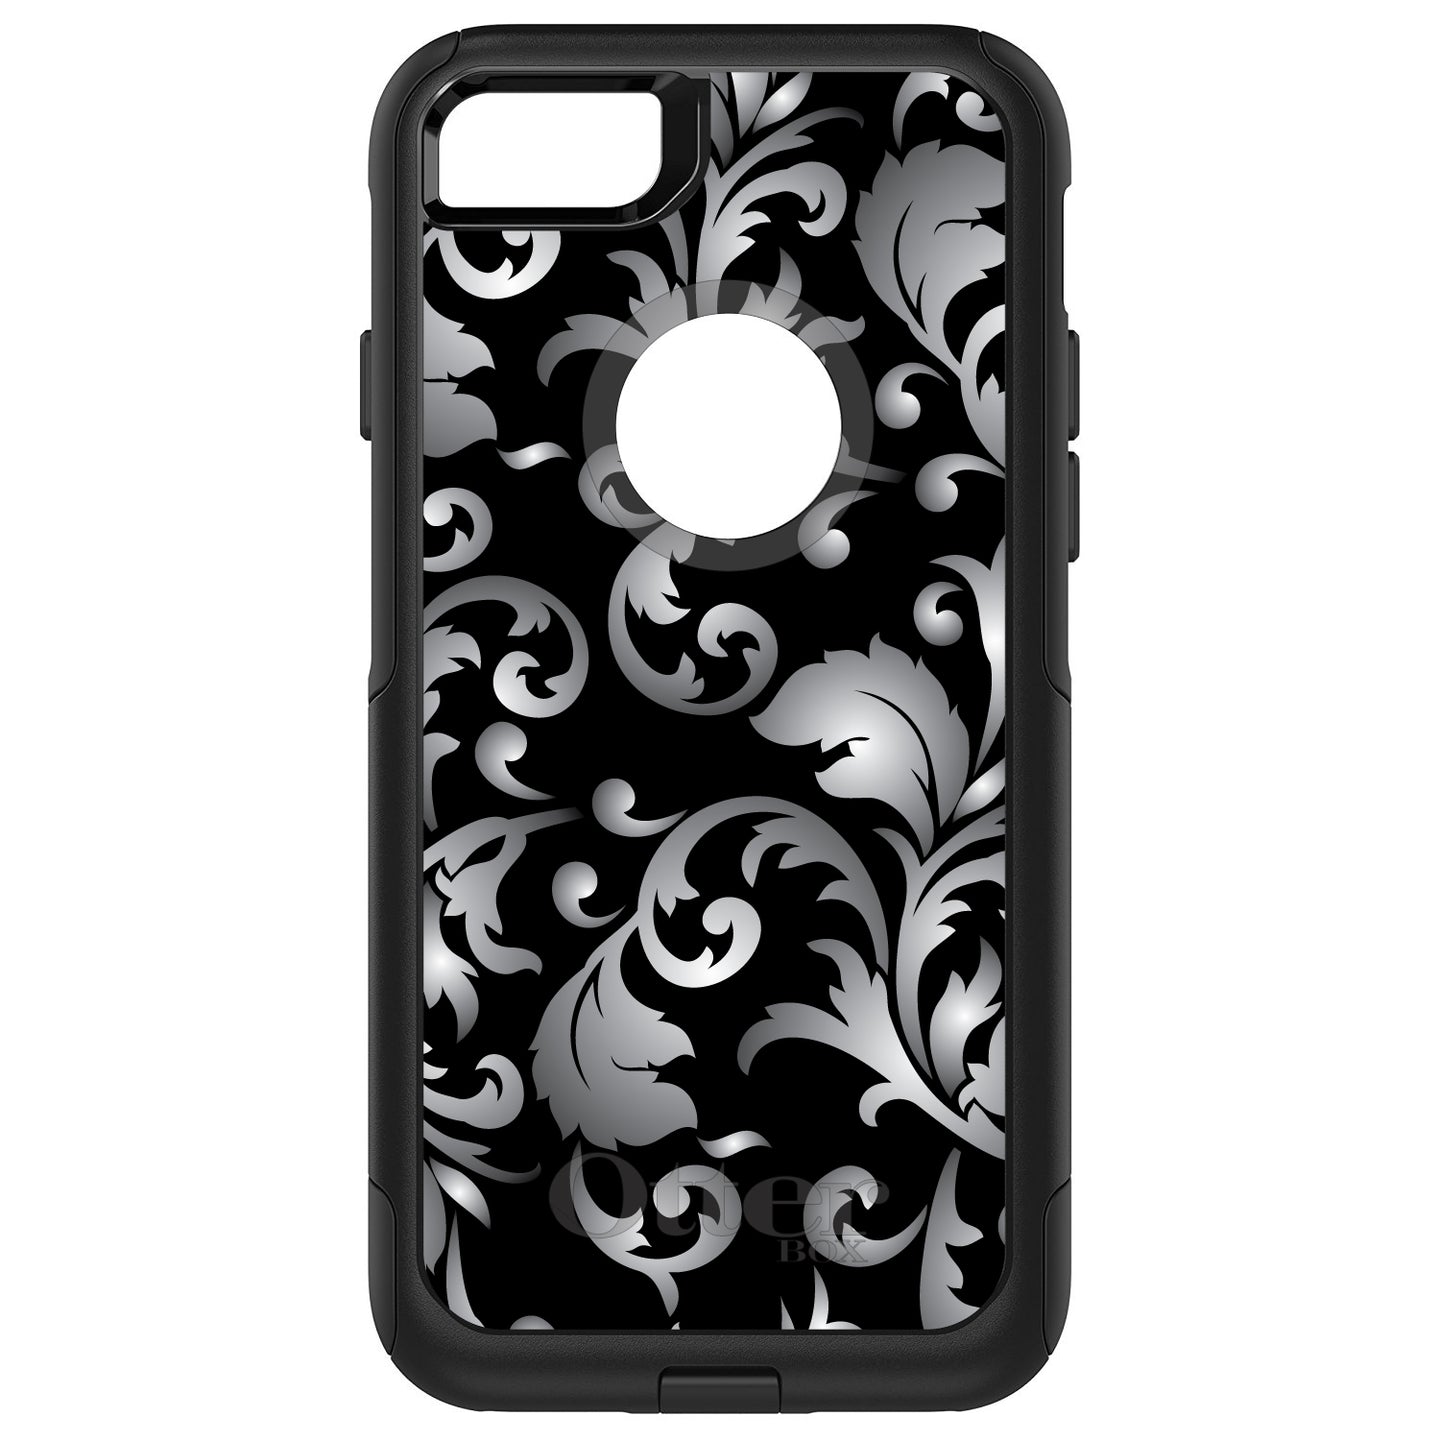 DistinctInk™ OtterBox Commuter Series Case for Apple iPhone or Samsung Galaxy - Silver Grey Black White Floral